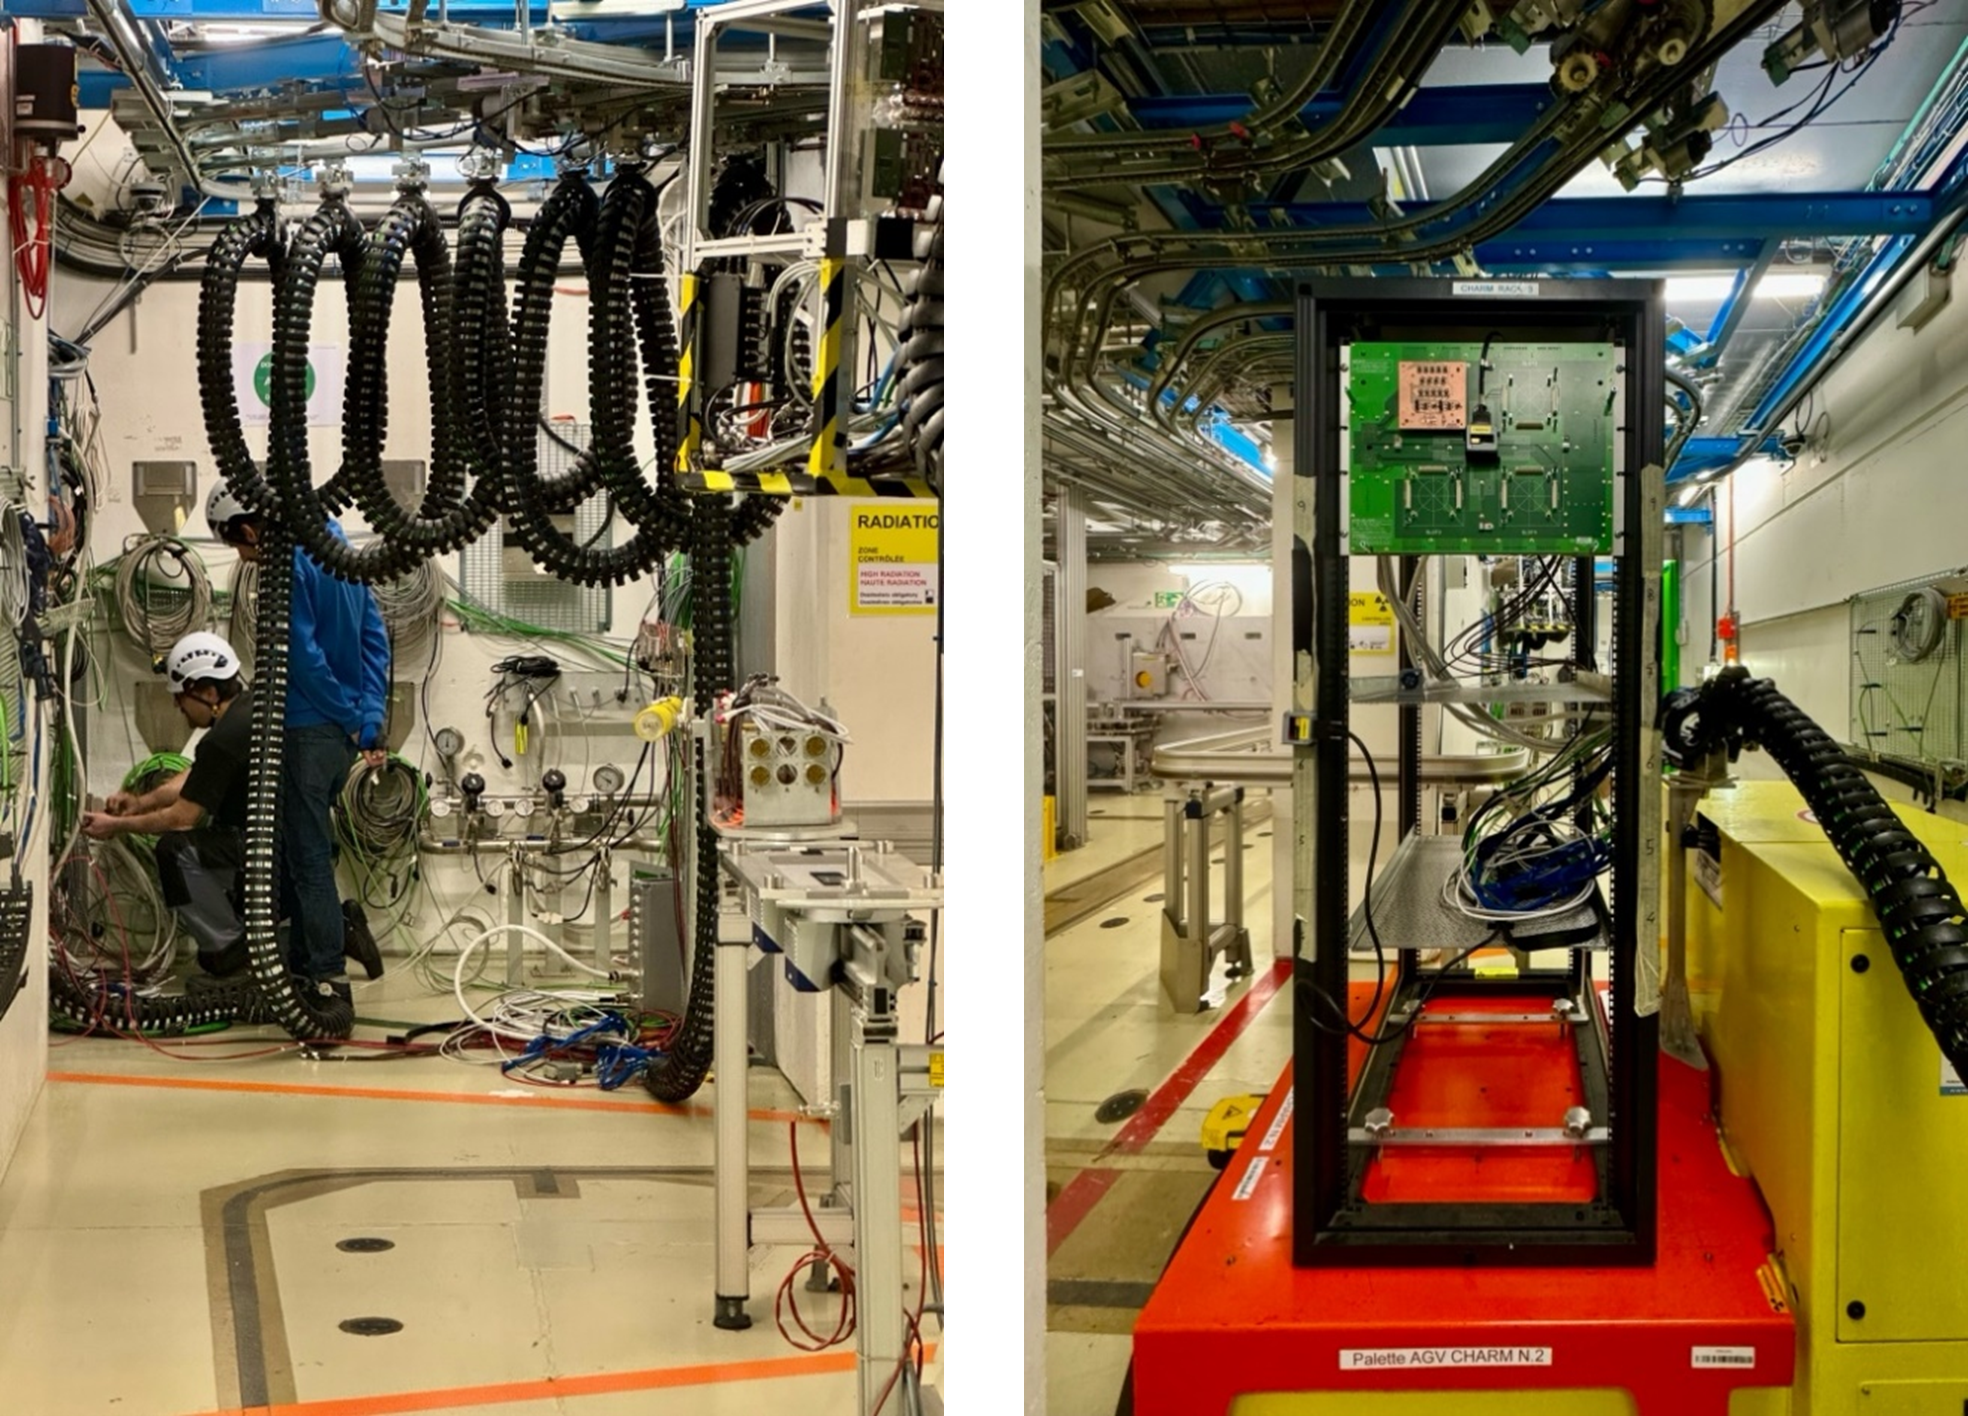 Figure 3: Wednesday routine work in CHARM facility. Preparing connections on the patch panels (left) and test rack ready to reach irradiation position on the AGV conveyor (right).